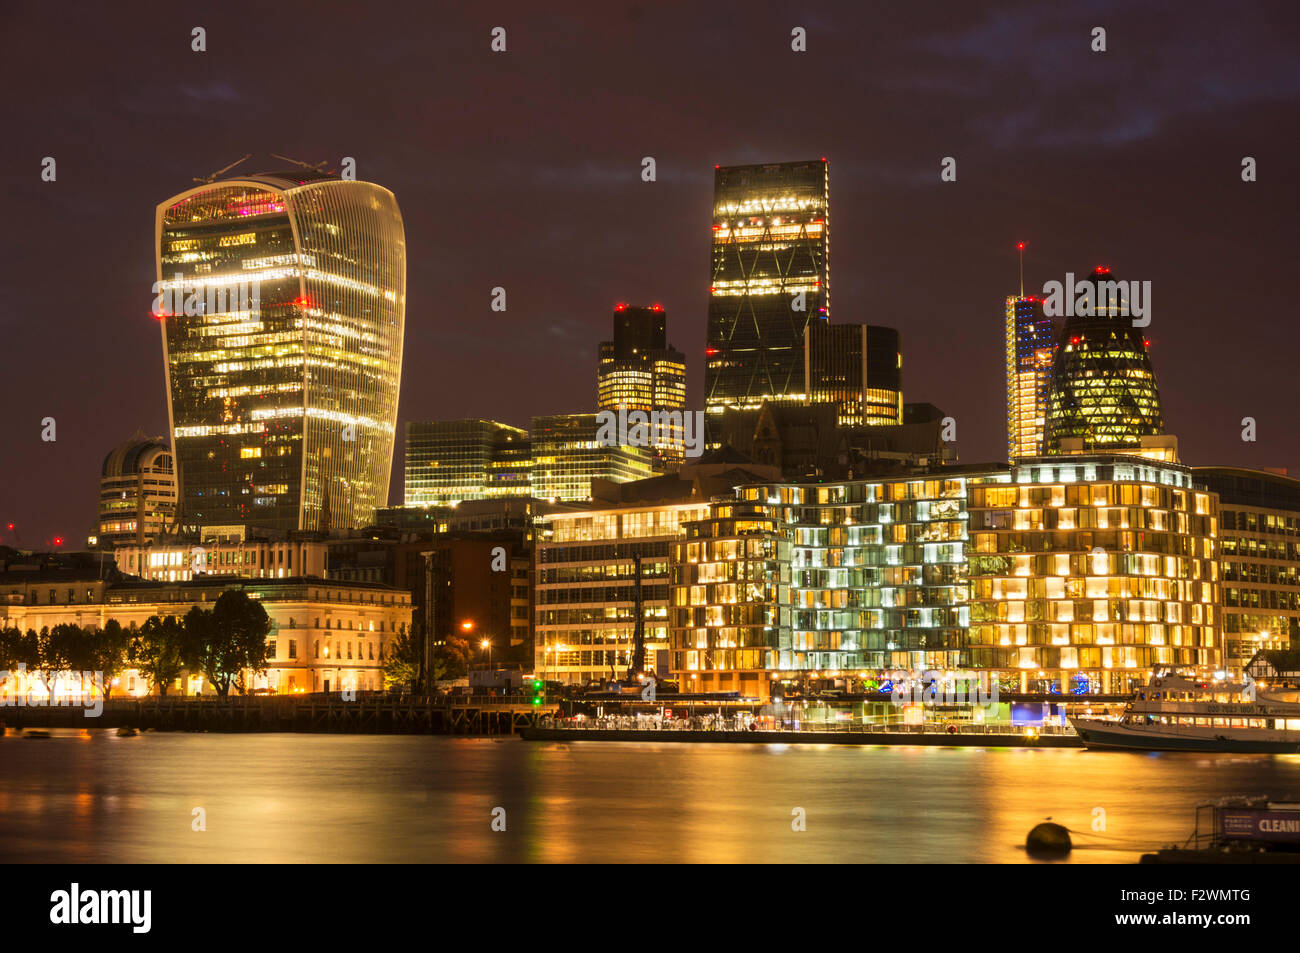 City of London skyline financial district lit up at night River Thames City of London UK GB EU Europe Stock Photo